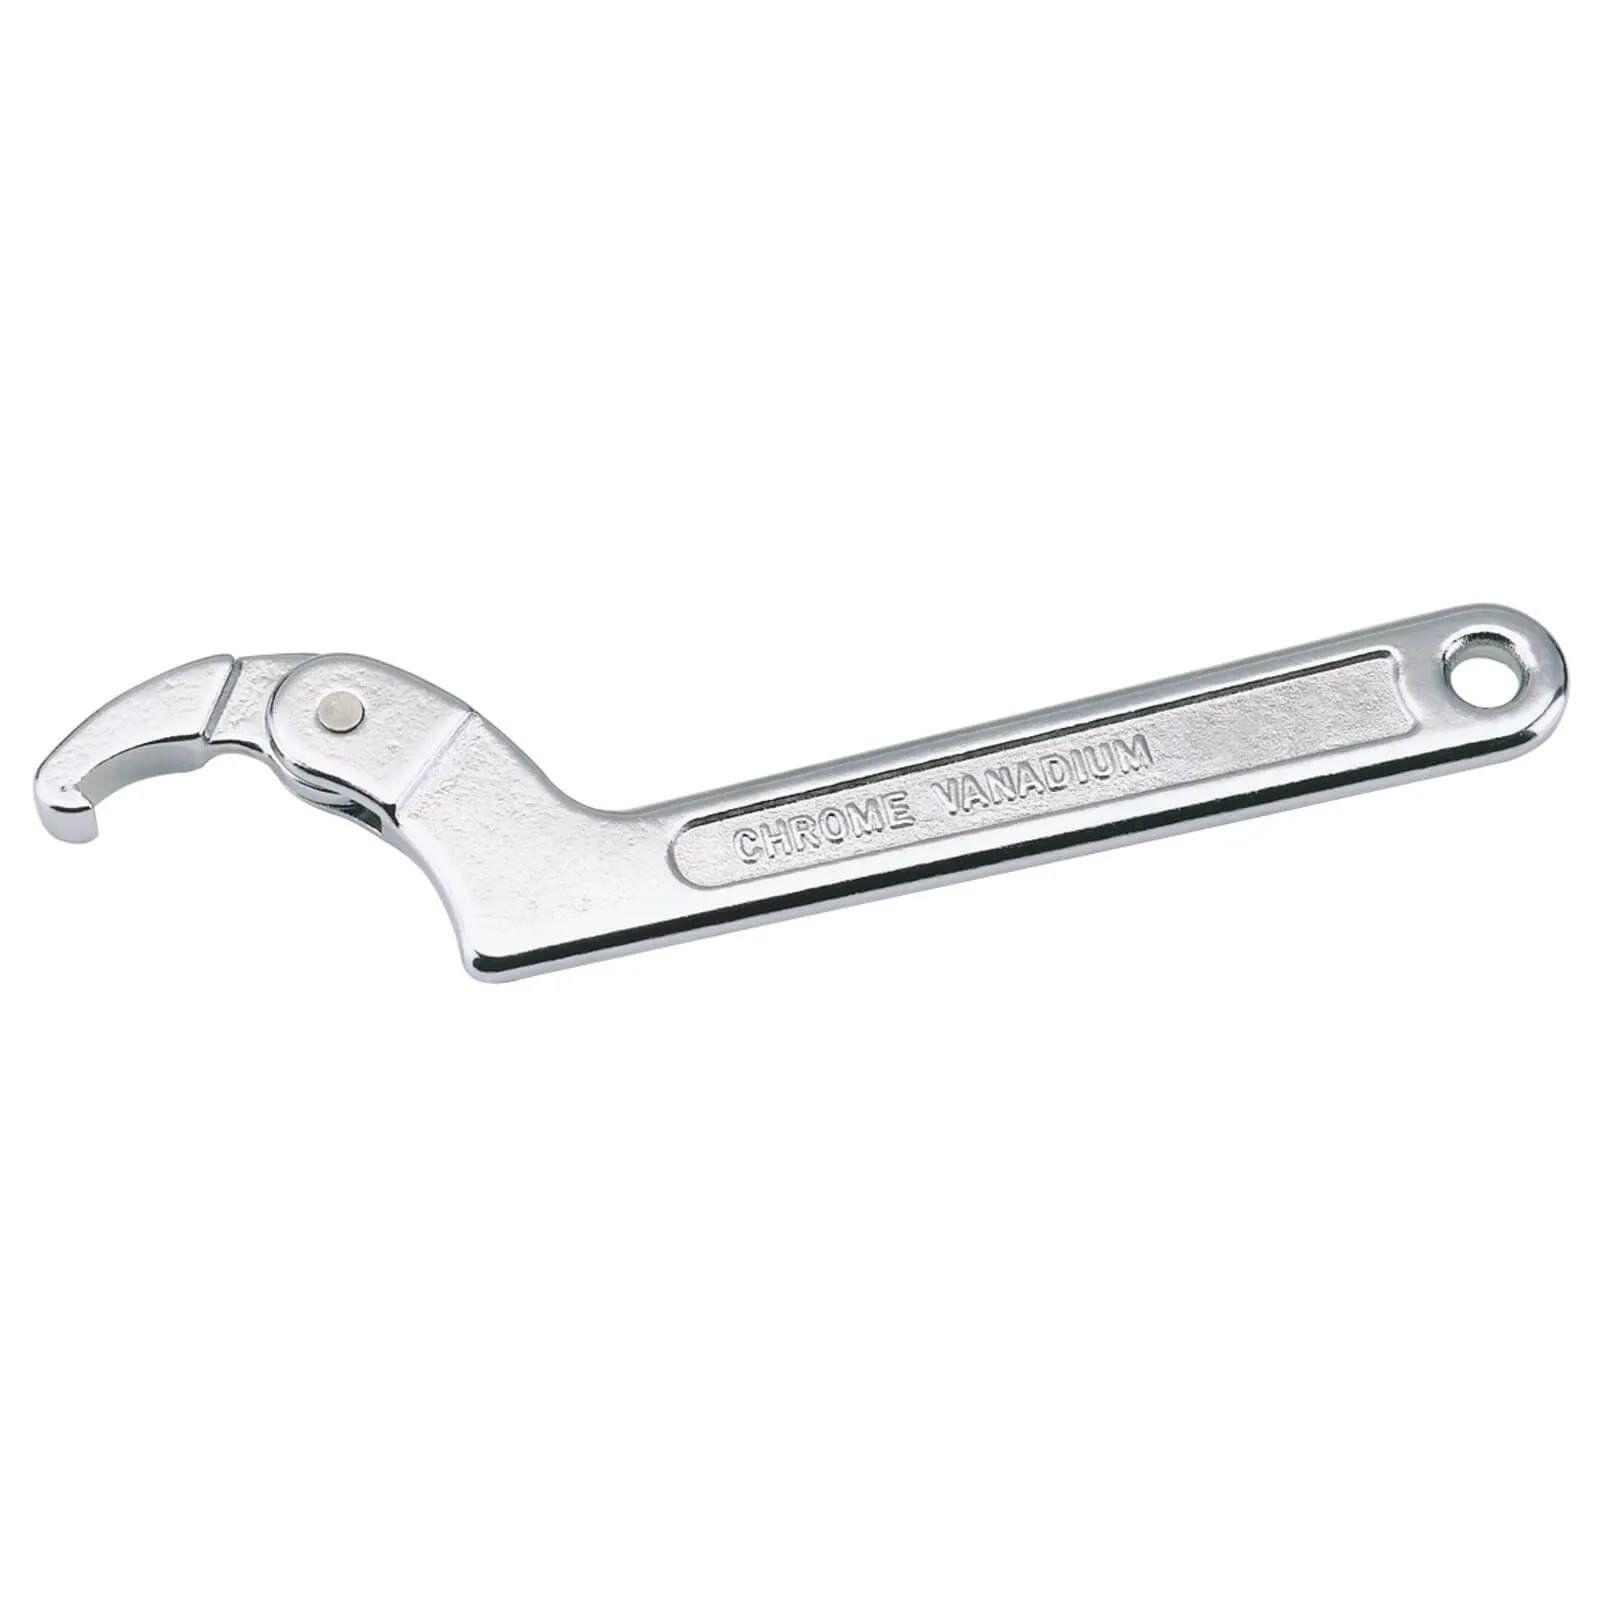 Draper Hook and Pin Spanner - 32mm x 76mm